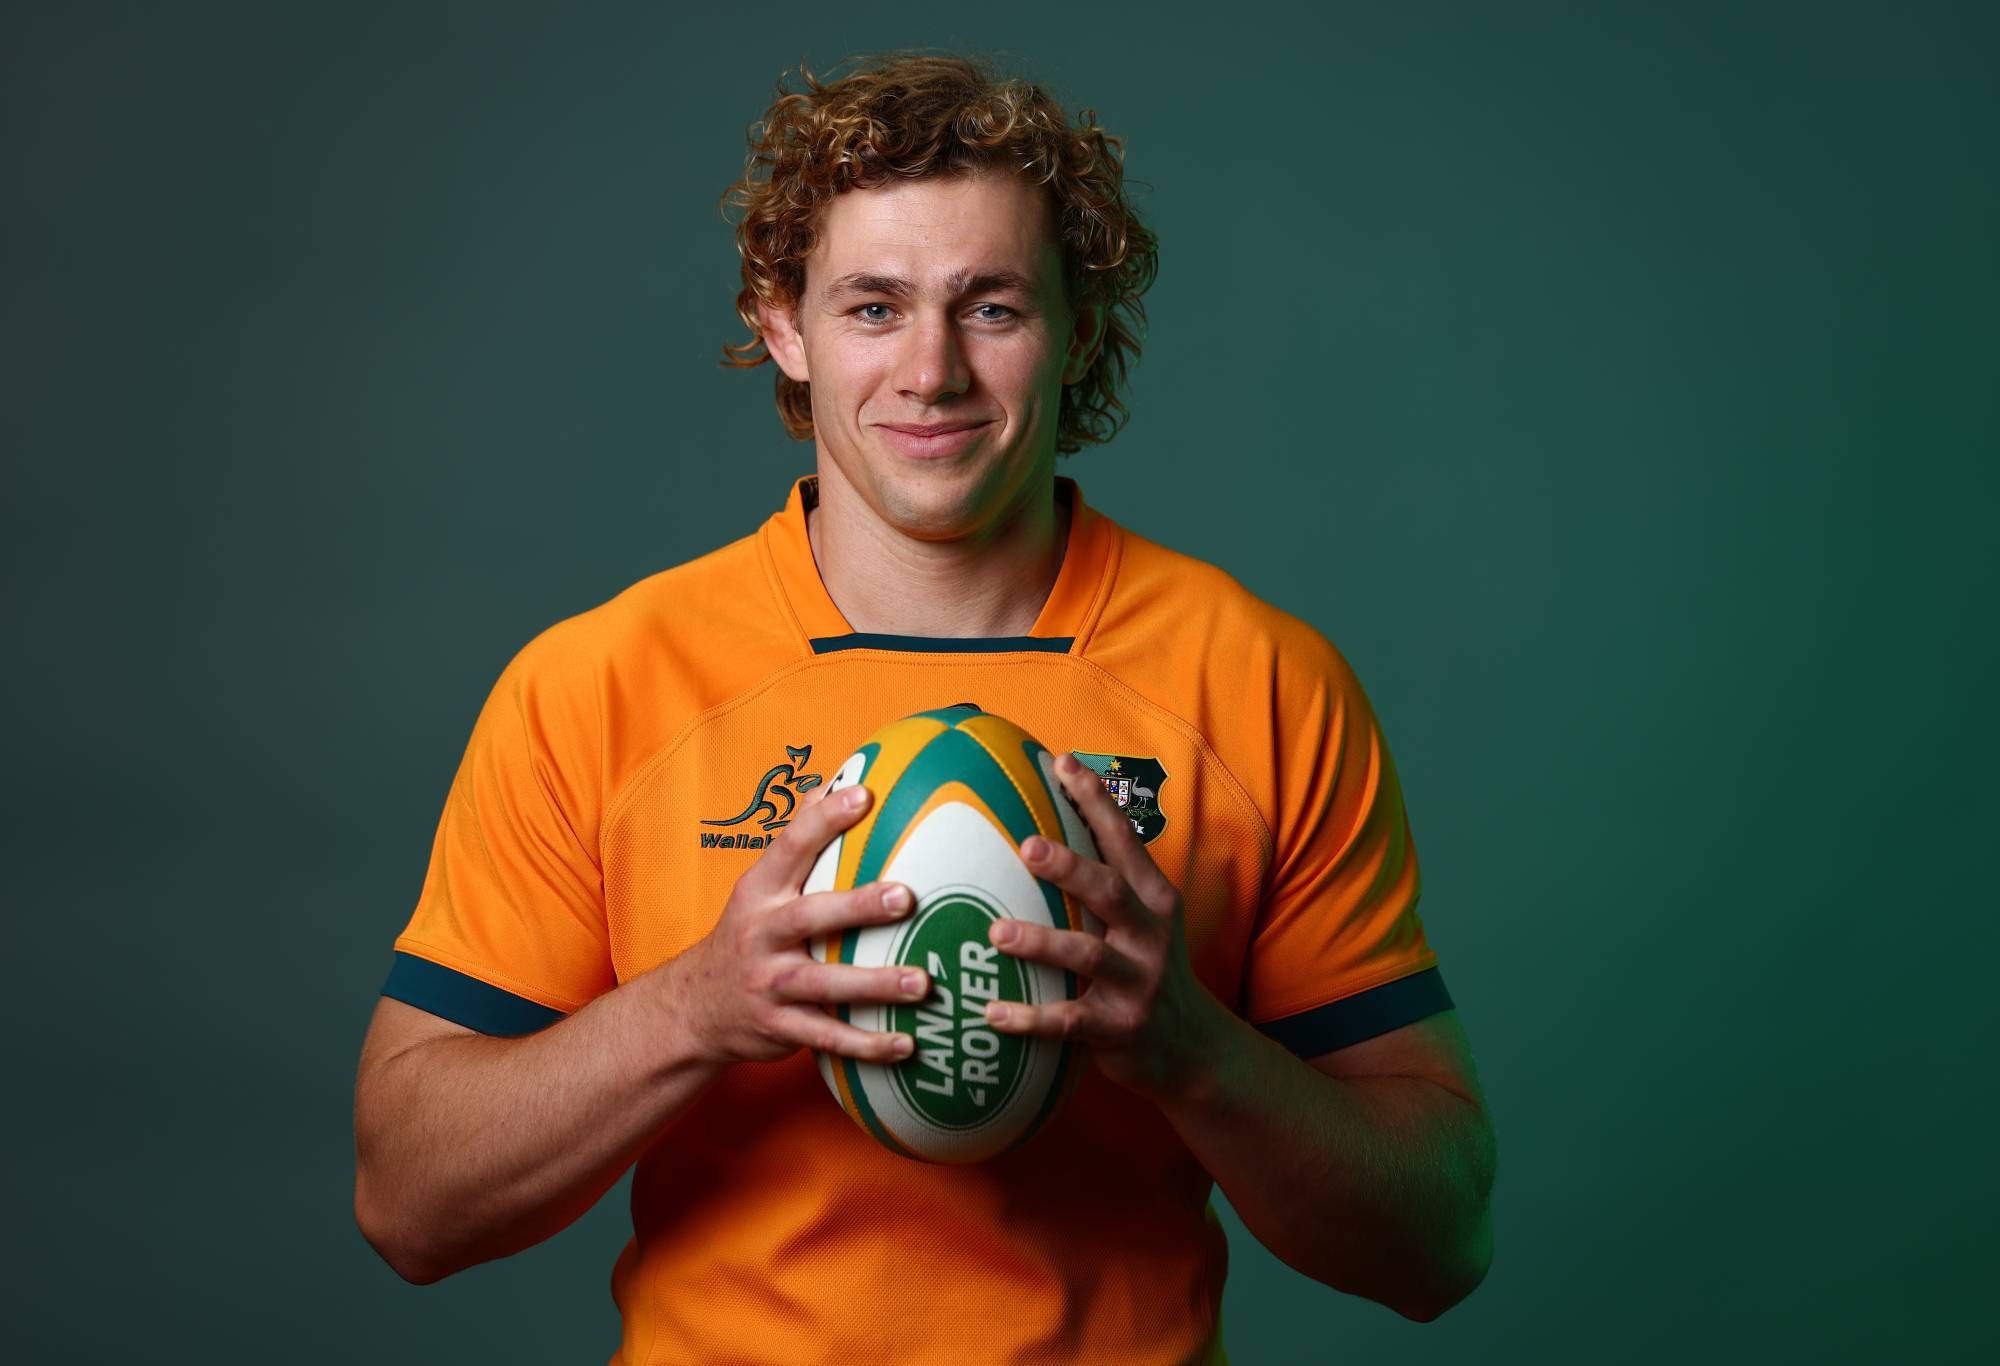 Ned Hanigan poses during the Australian Wallabies 2022 team headshots session on June 24, 2022 in Sunshine Coast, Australia. (Photo by Chris Hyde/Getty Images for Rugby Australia)